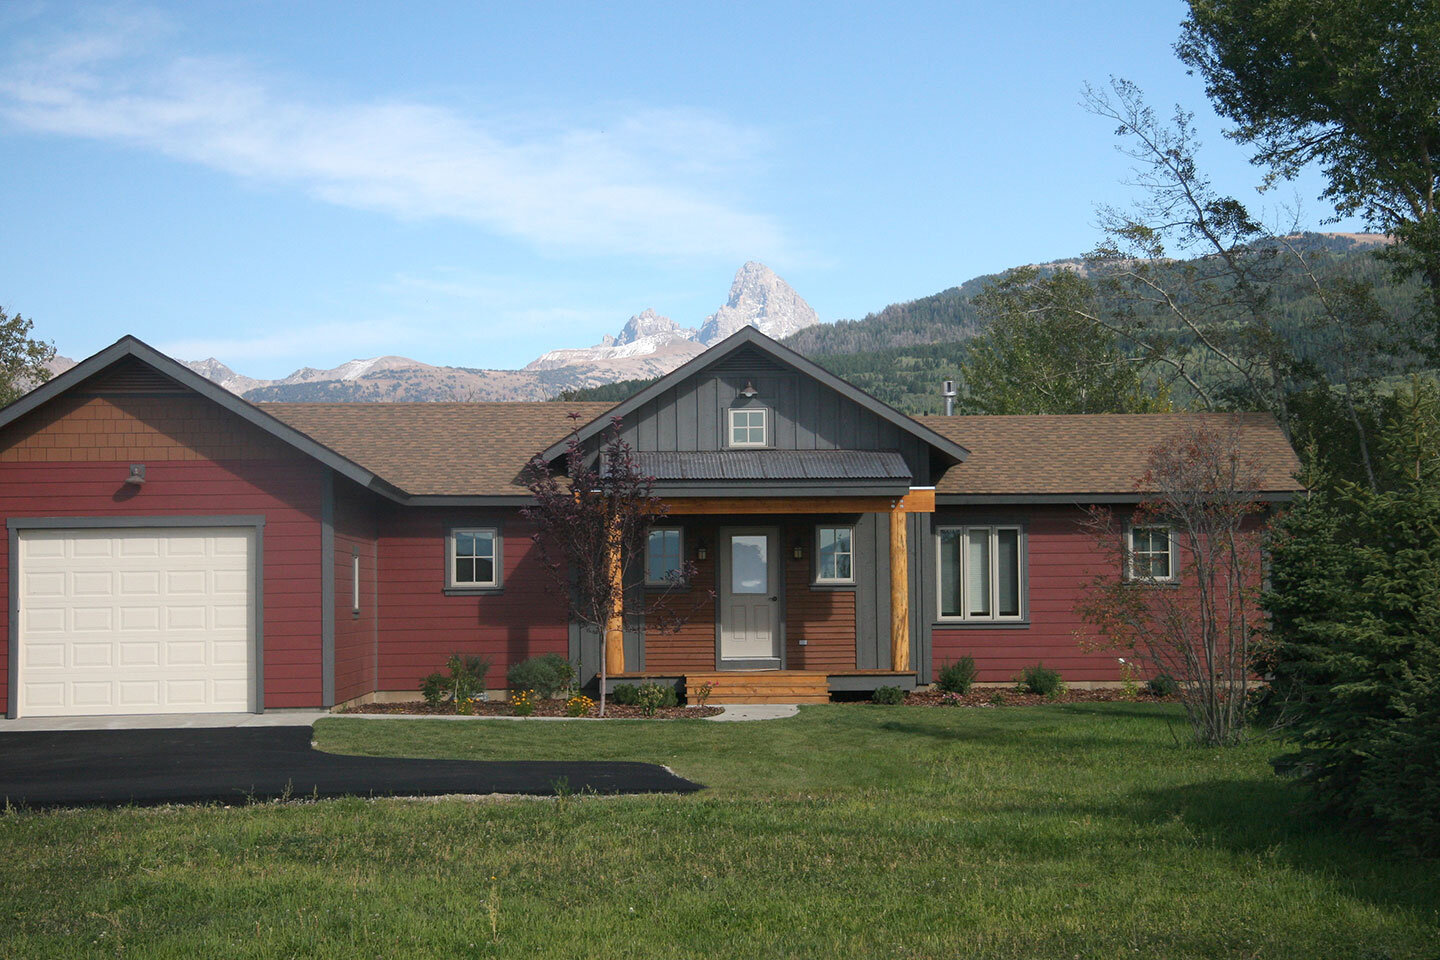 Residence entry side with Grand Teton peeking in the background